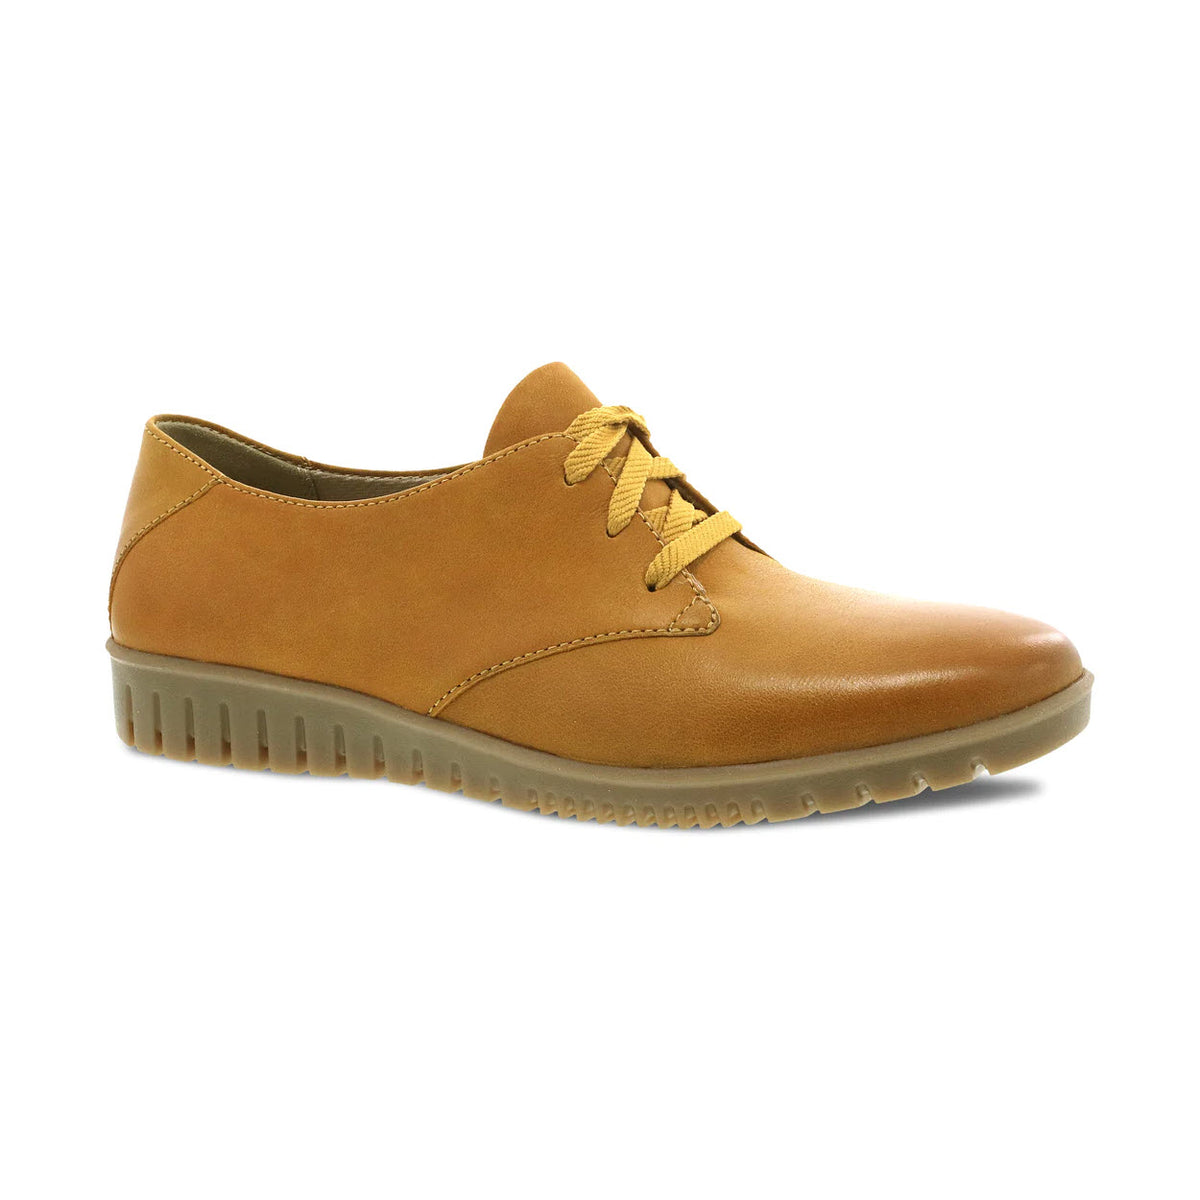 A single Dansko Libbie Mustard Burnished Oxford shoe with white rubber sole, isolated on a white background.